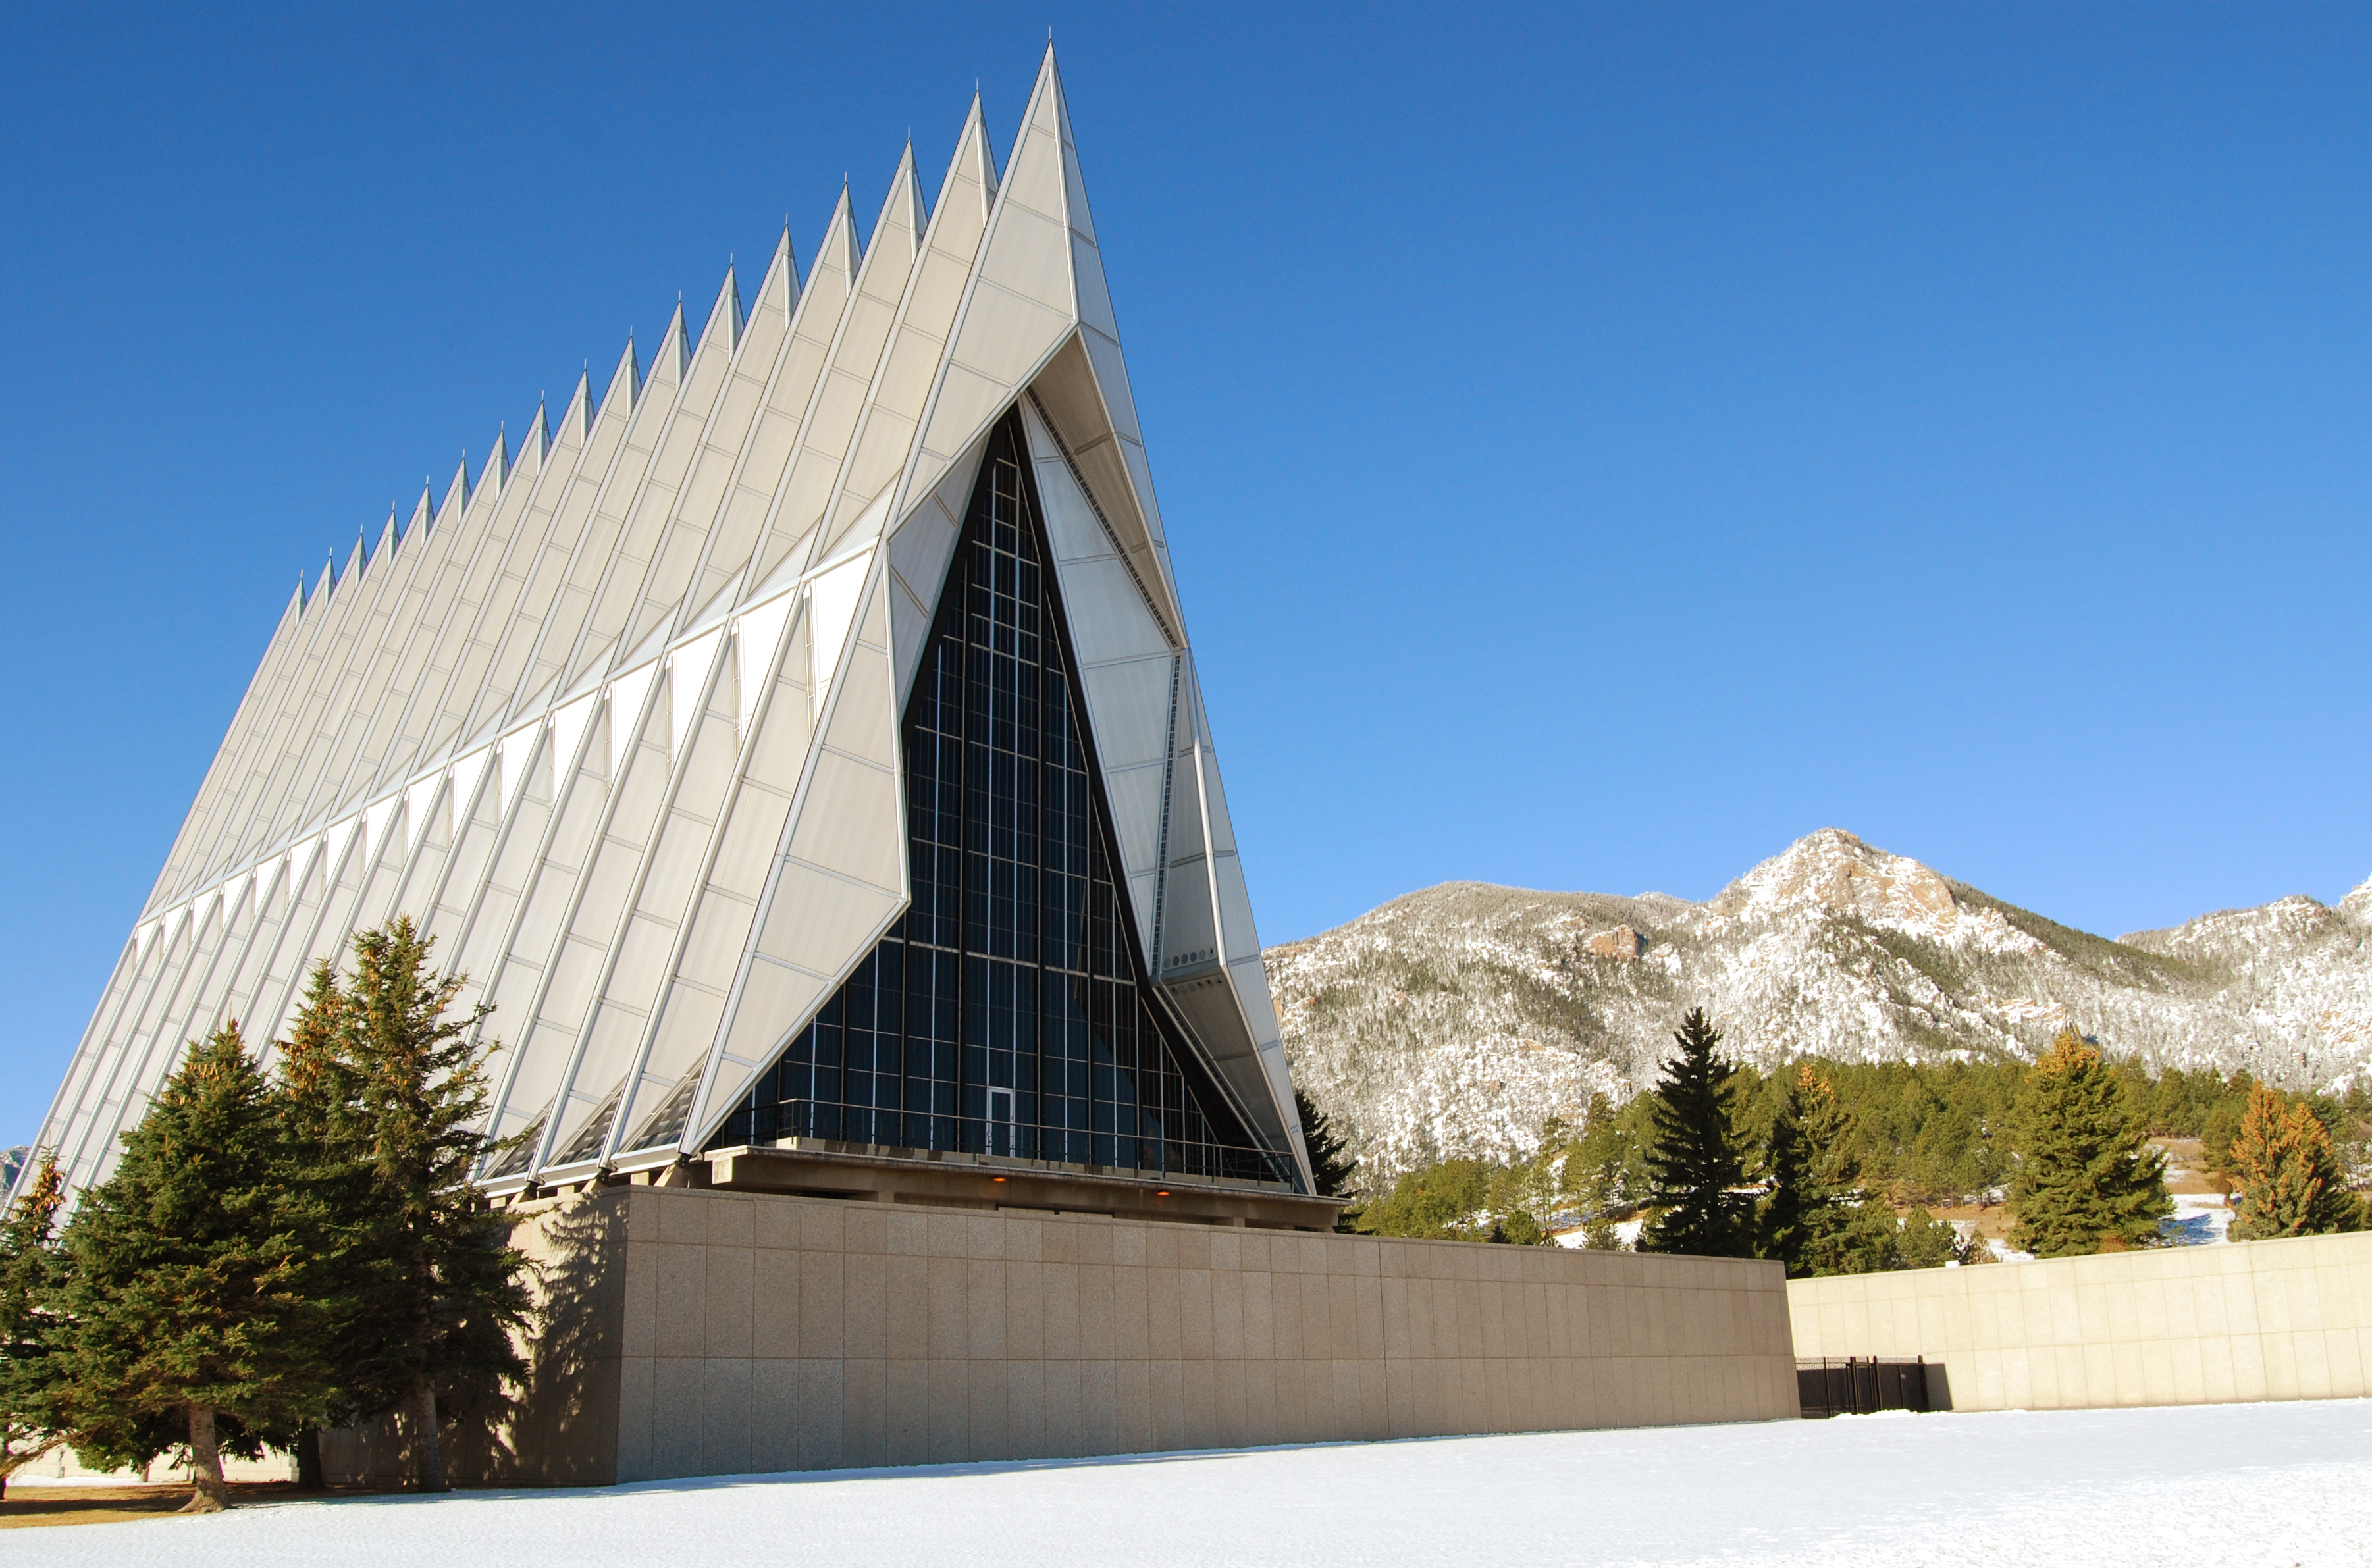 The Cadet Chapel at the U.S. Air Force Academy in Colorado Springs, Colo. (Staff Sgt. Don Branum / Air Force)